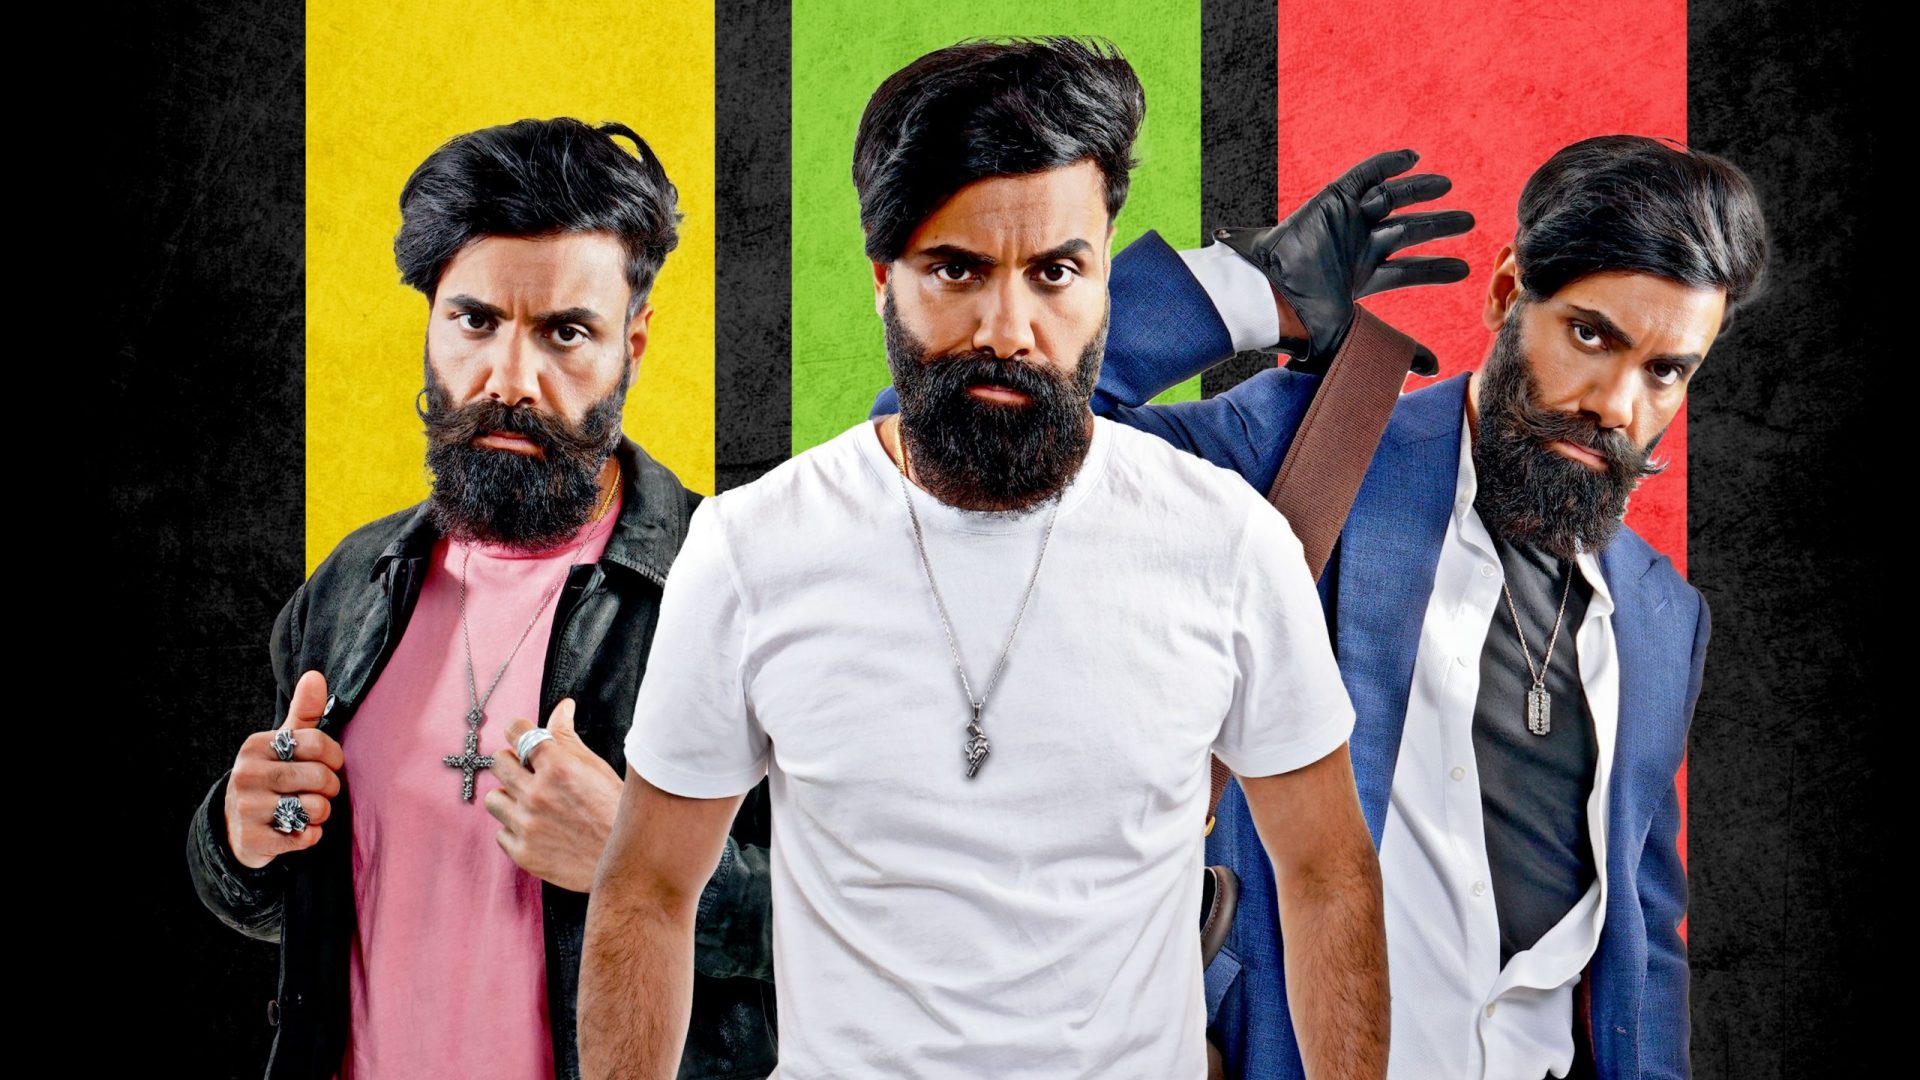 Paul Chowdhry: Family Friendly Comedian (No Children)